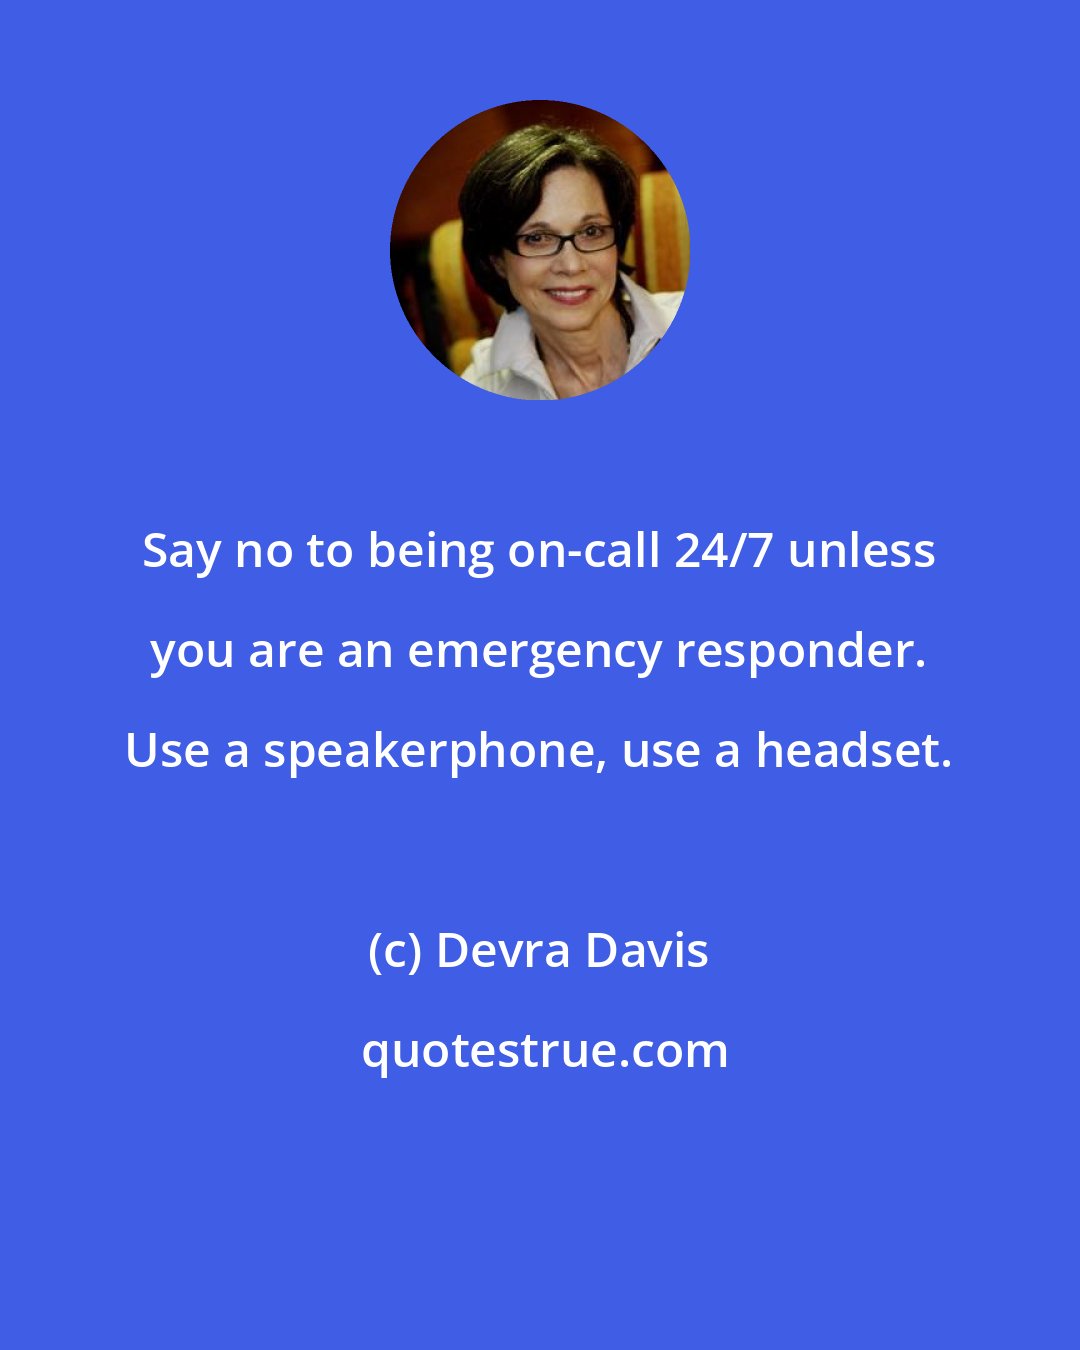 Devra Davis: Say no to being on-call 24/7 unless you are an emergency responder. Use a speakerphone, use a headset.